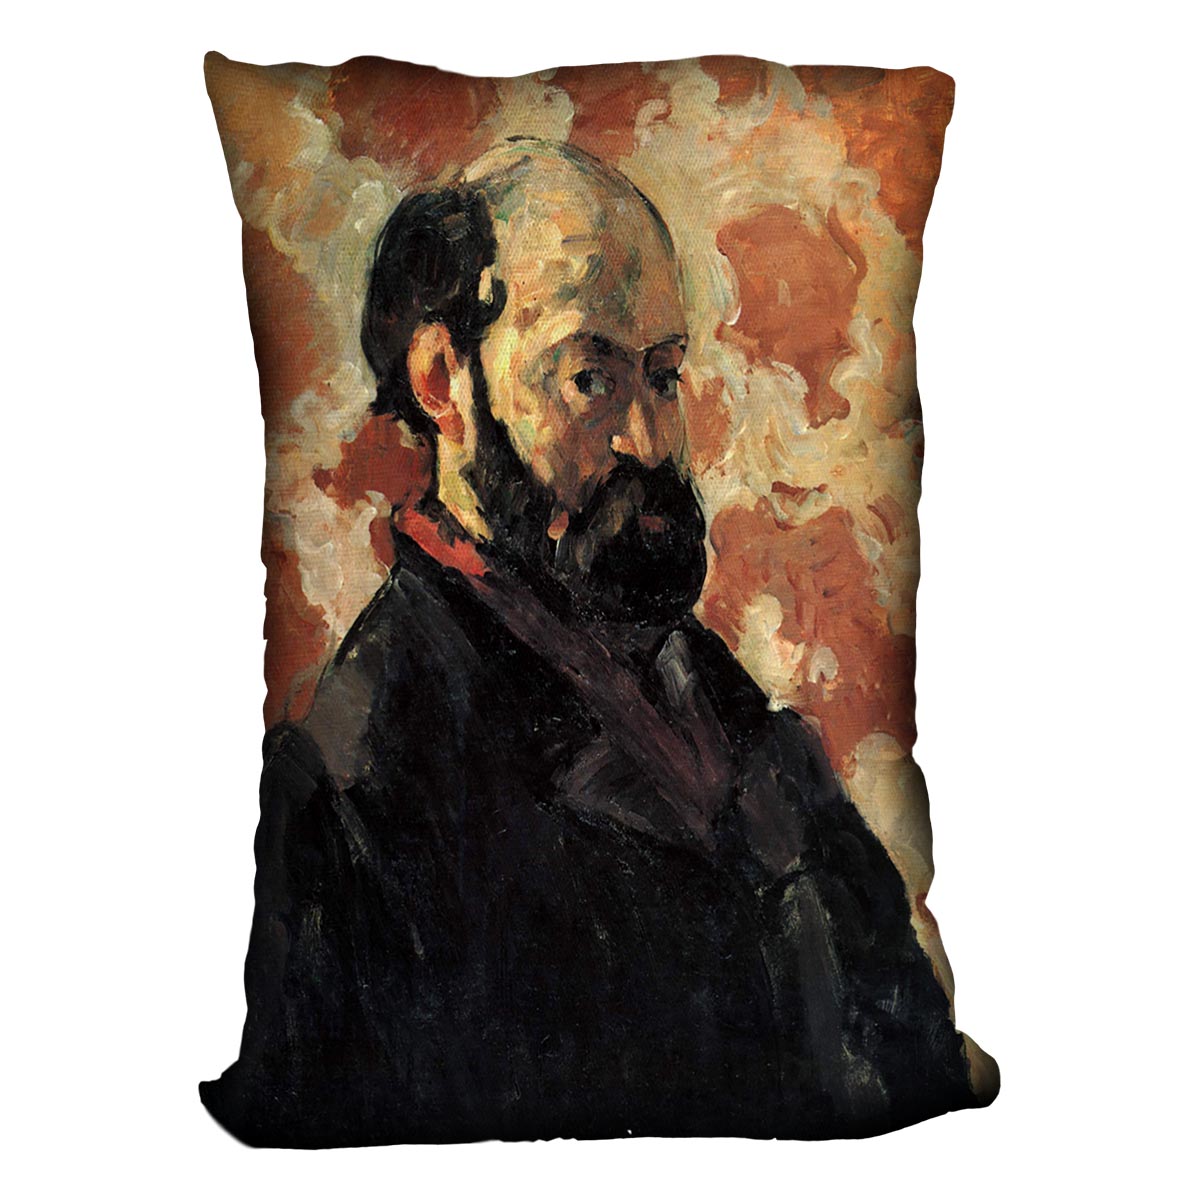 Self-portrait before Rose Background by Cezanne Cushion